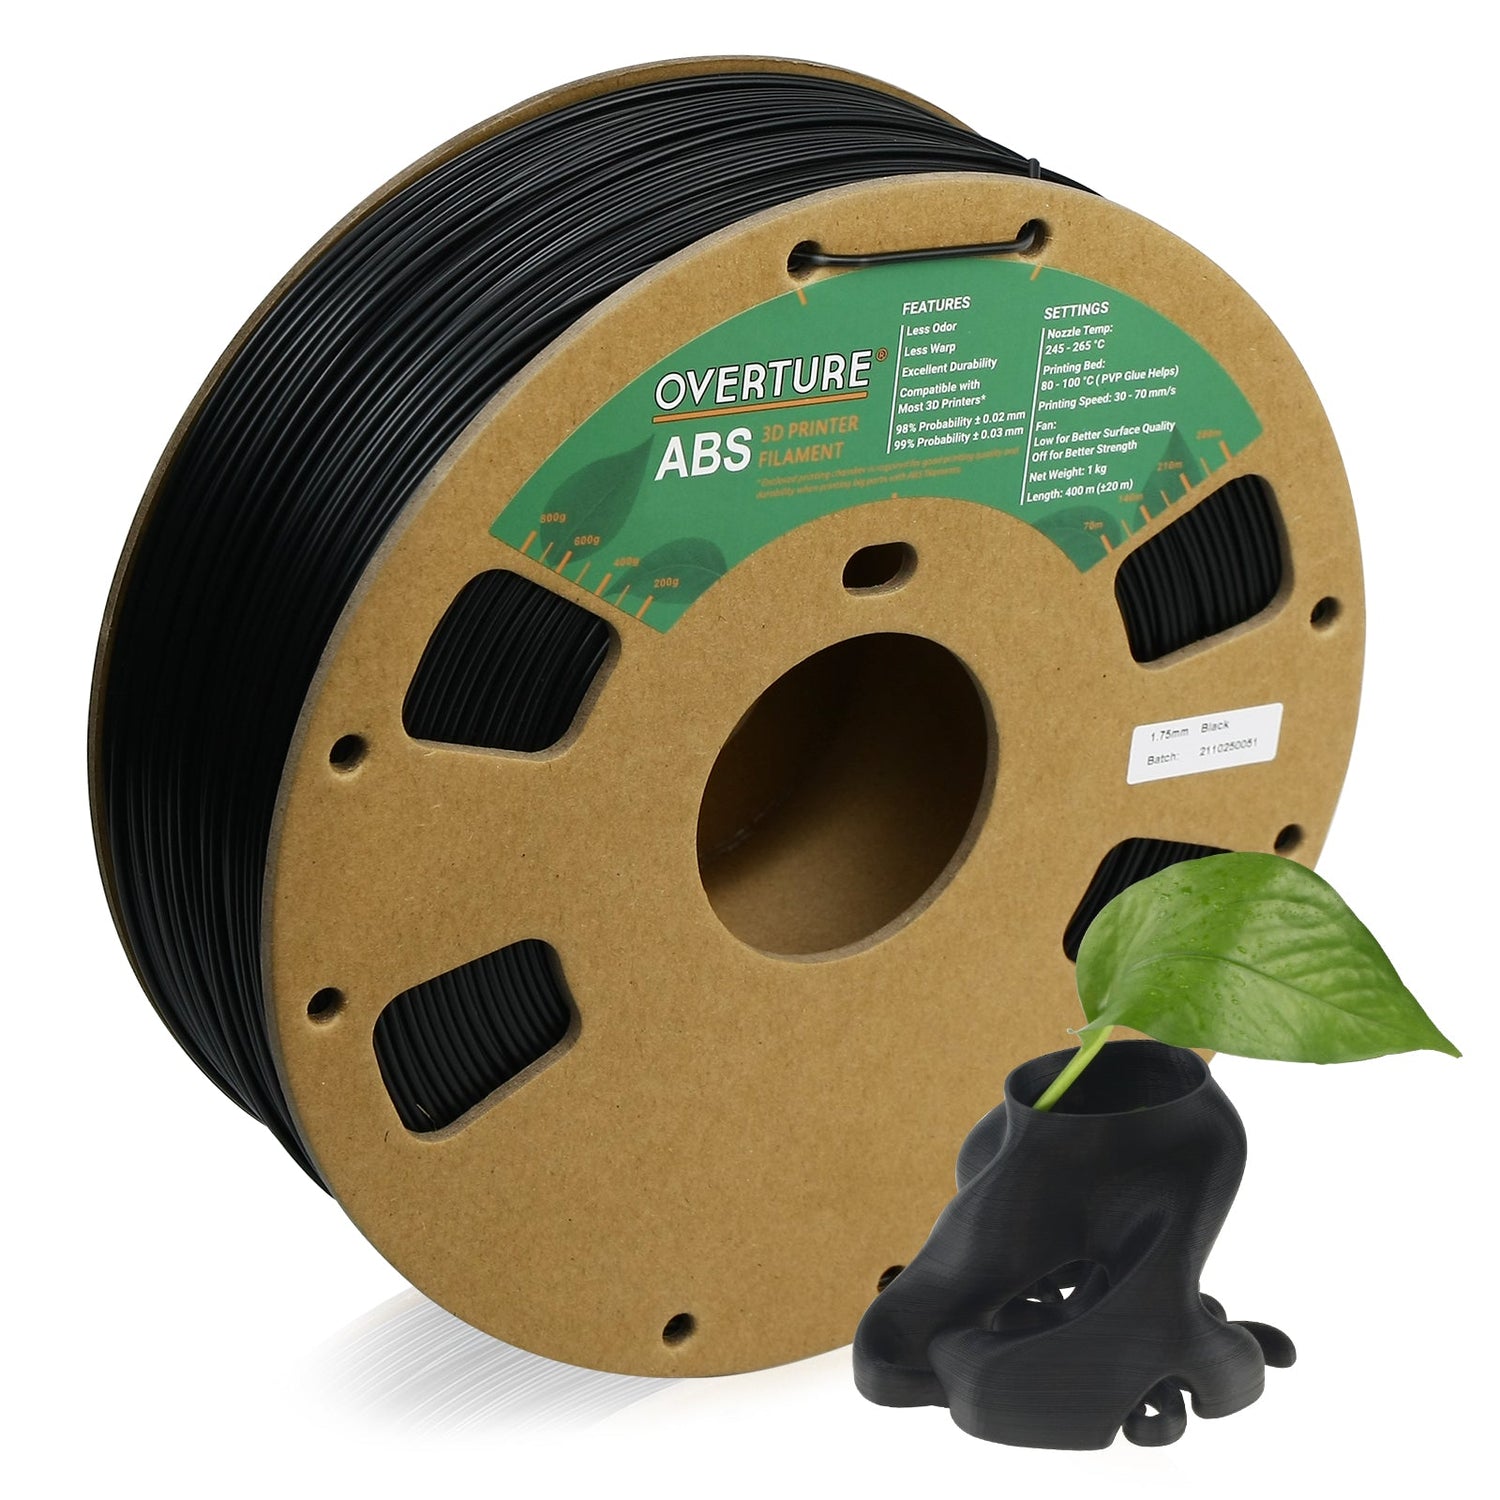 Overture ABS 3D Printing Filament